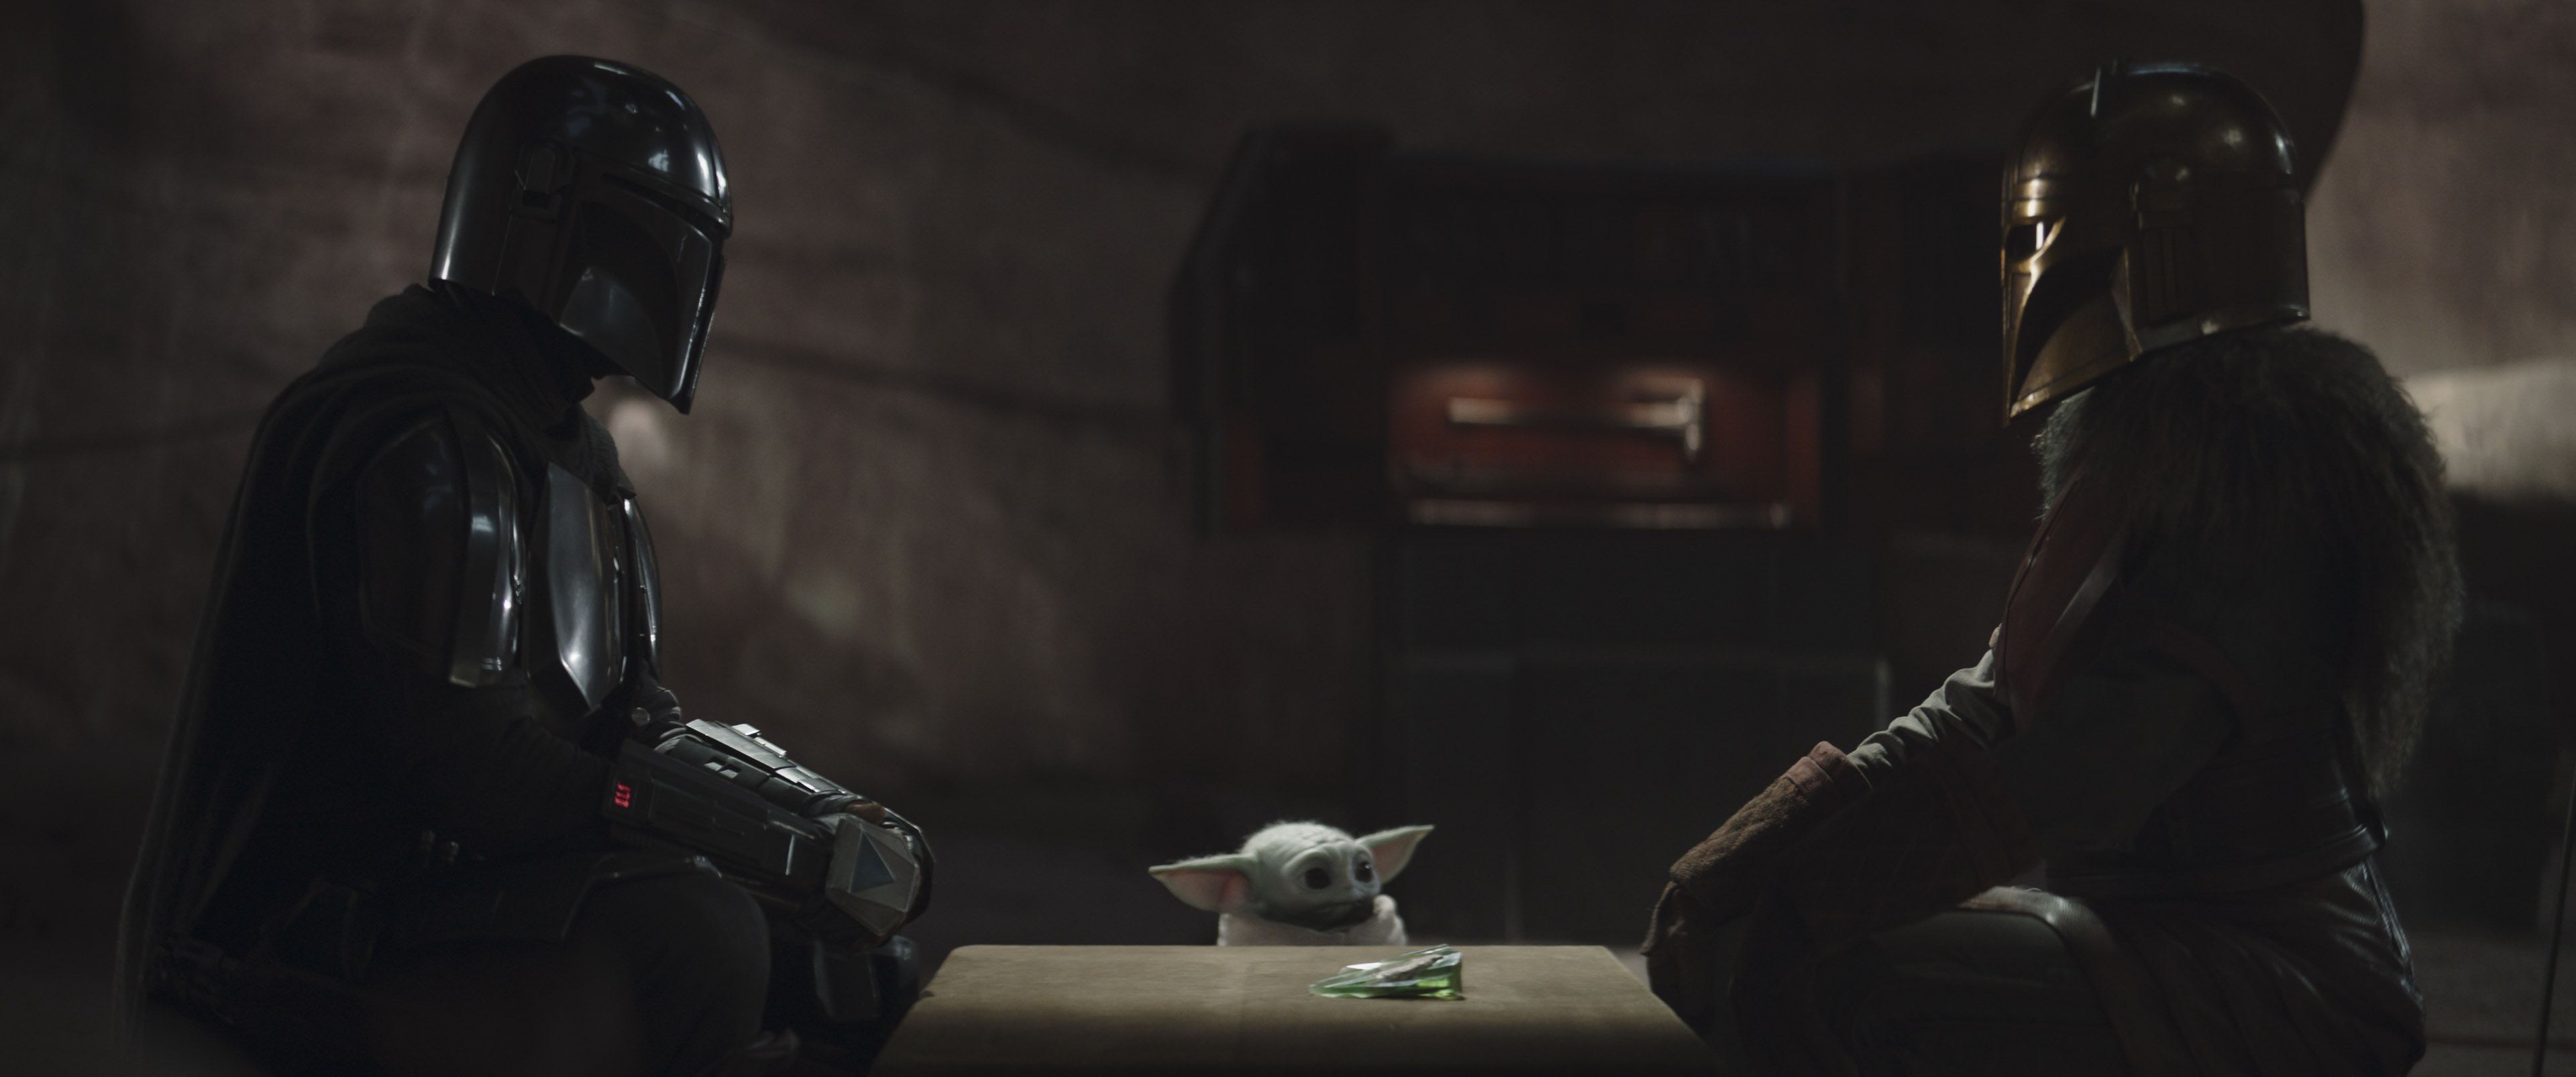 The Mandalorian (Pedro Pascal) sitting and looking at the Armorer (Emily Swallow) with Grogu (Baby Yoda) in between